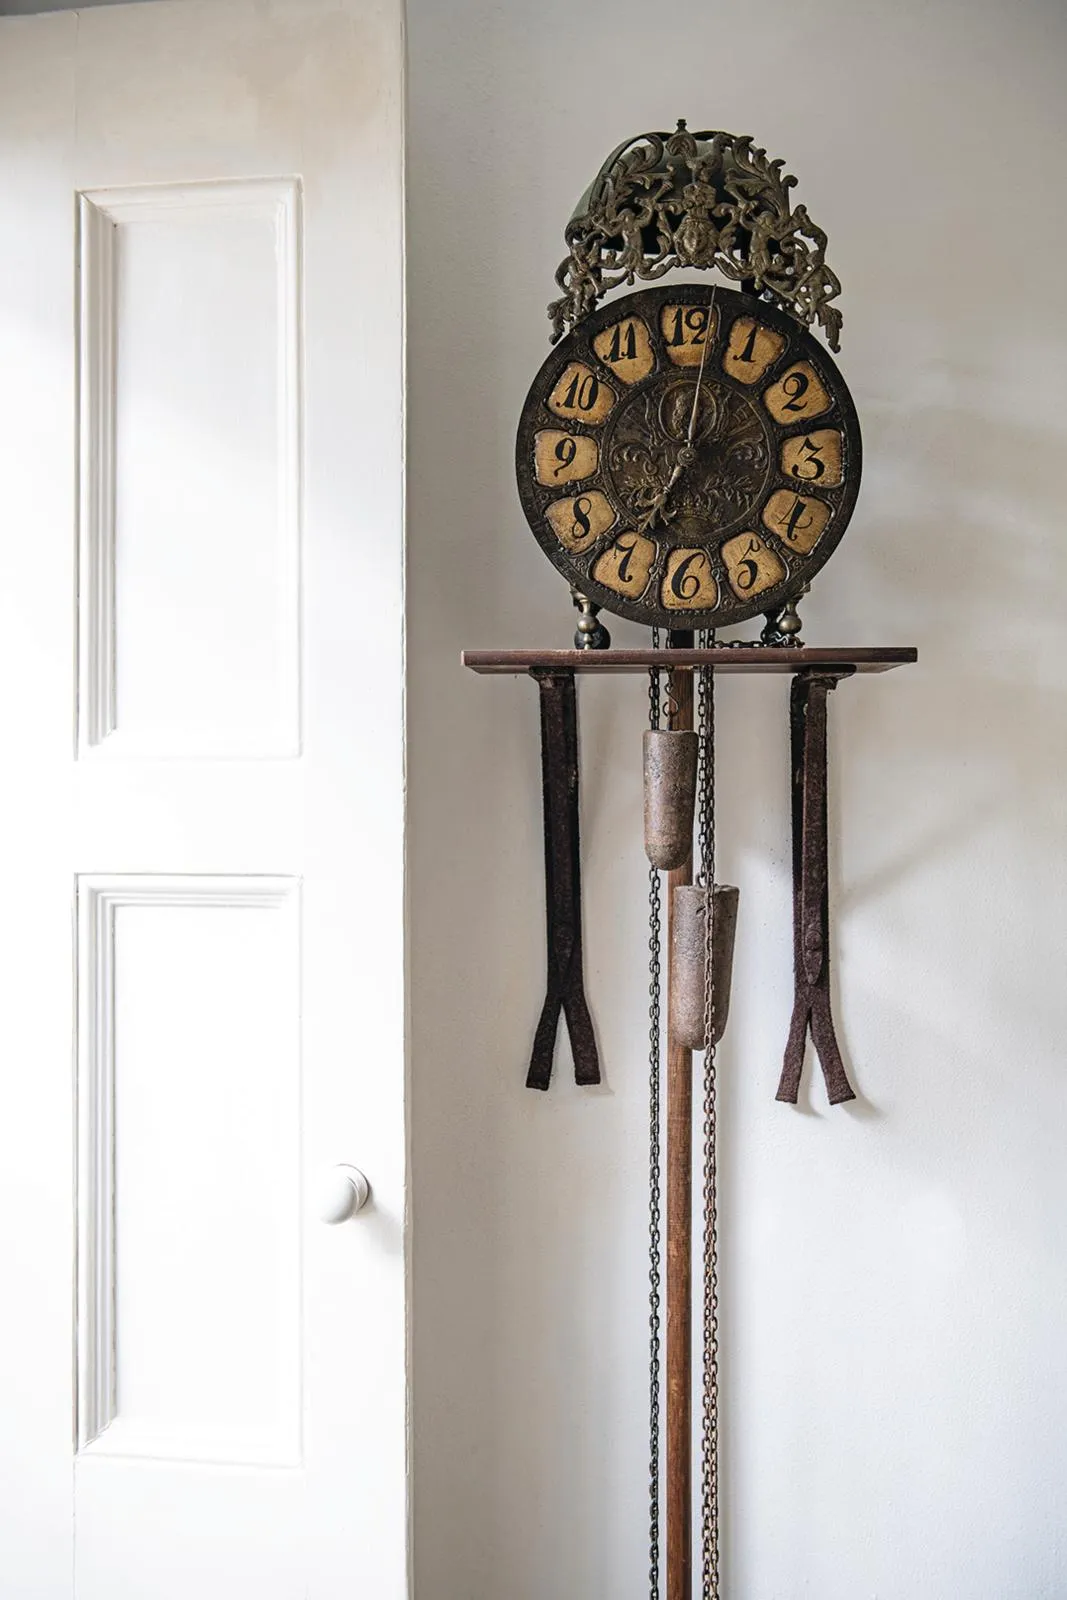 Grade II-listed rectory, French lantern clock.